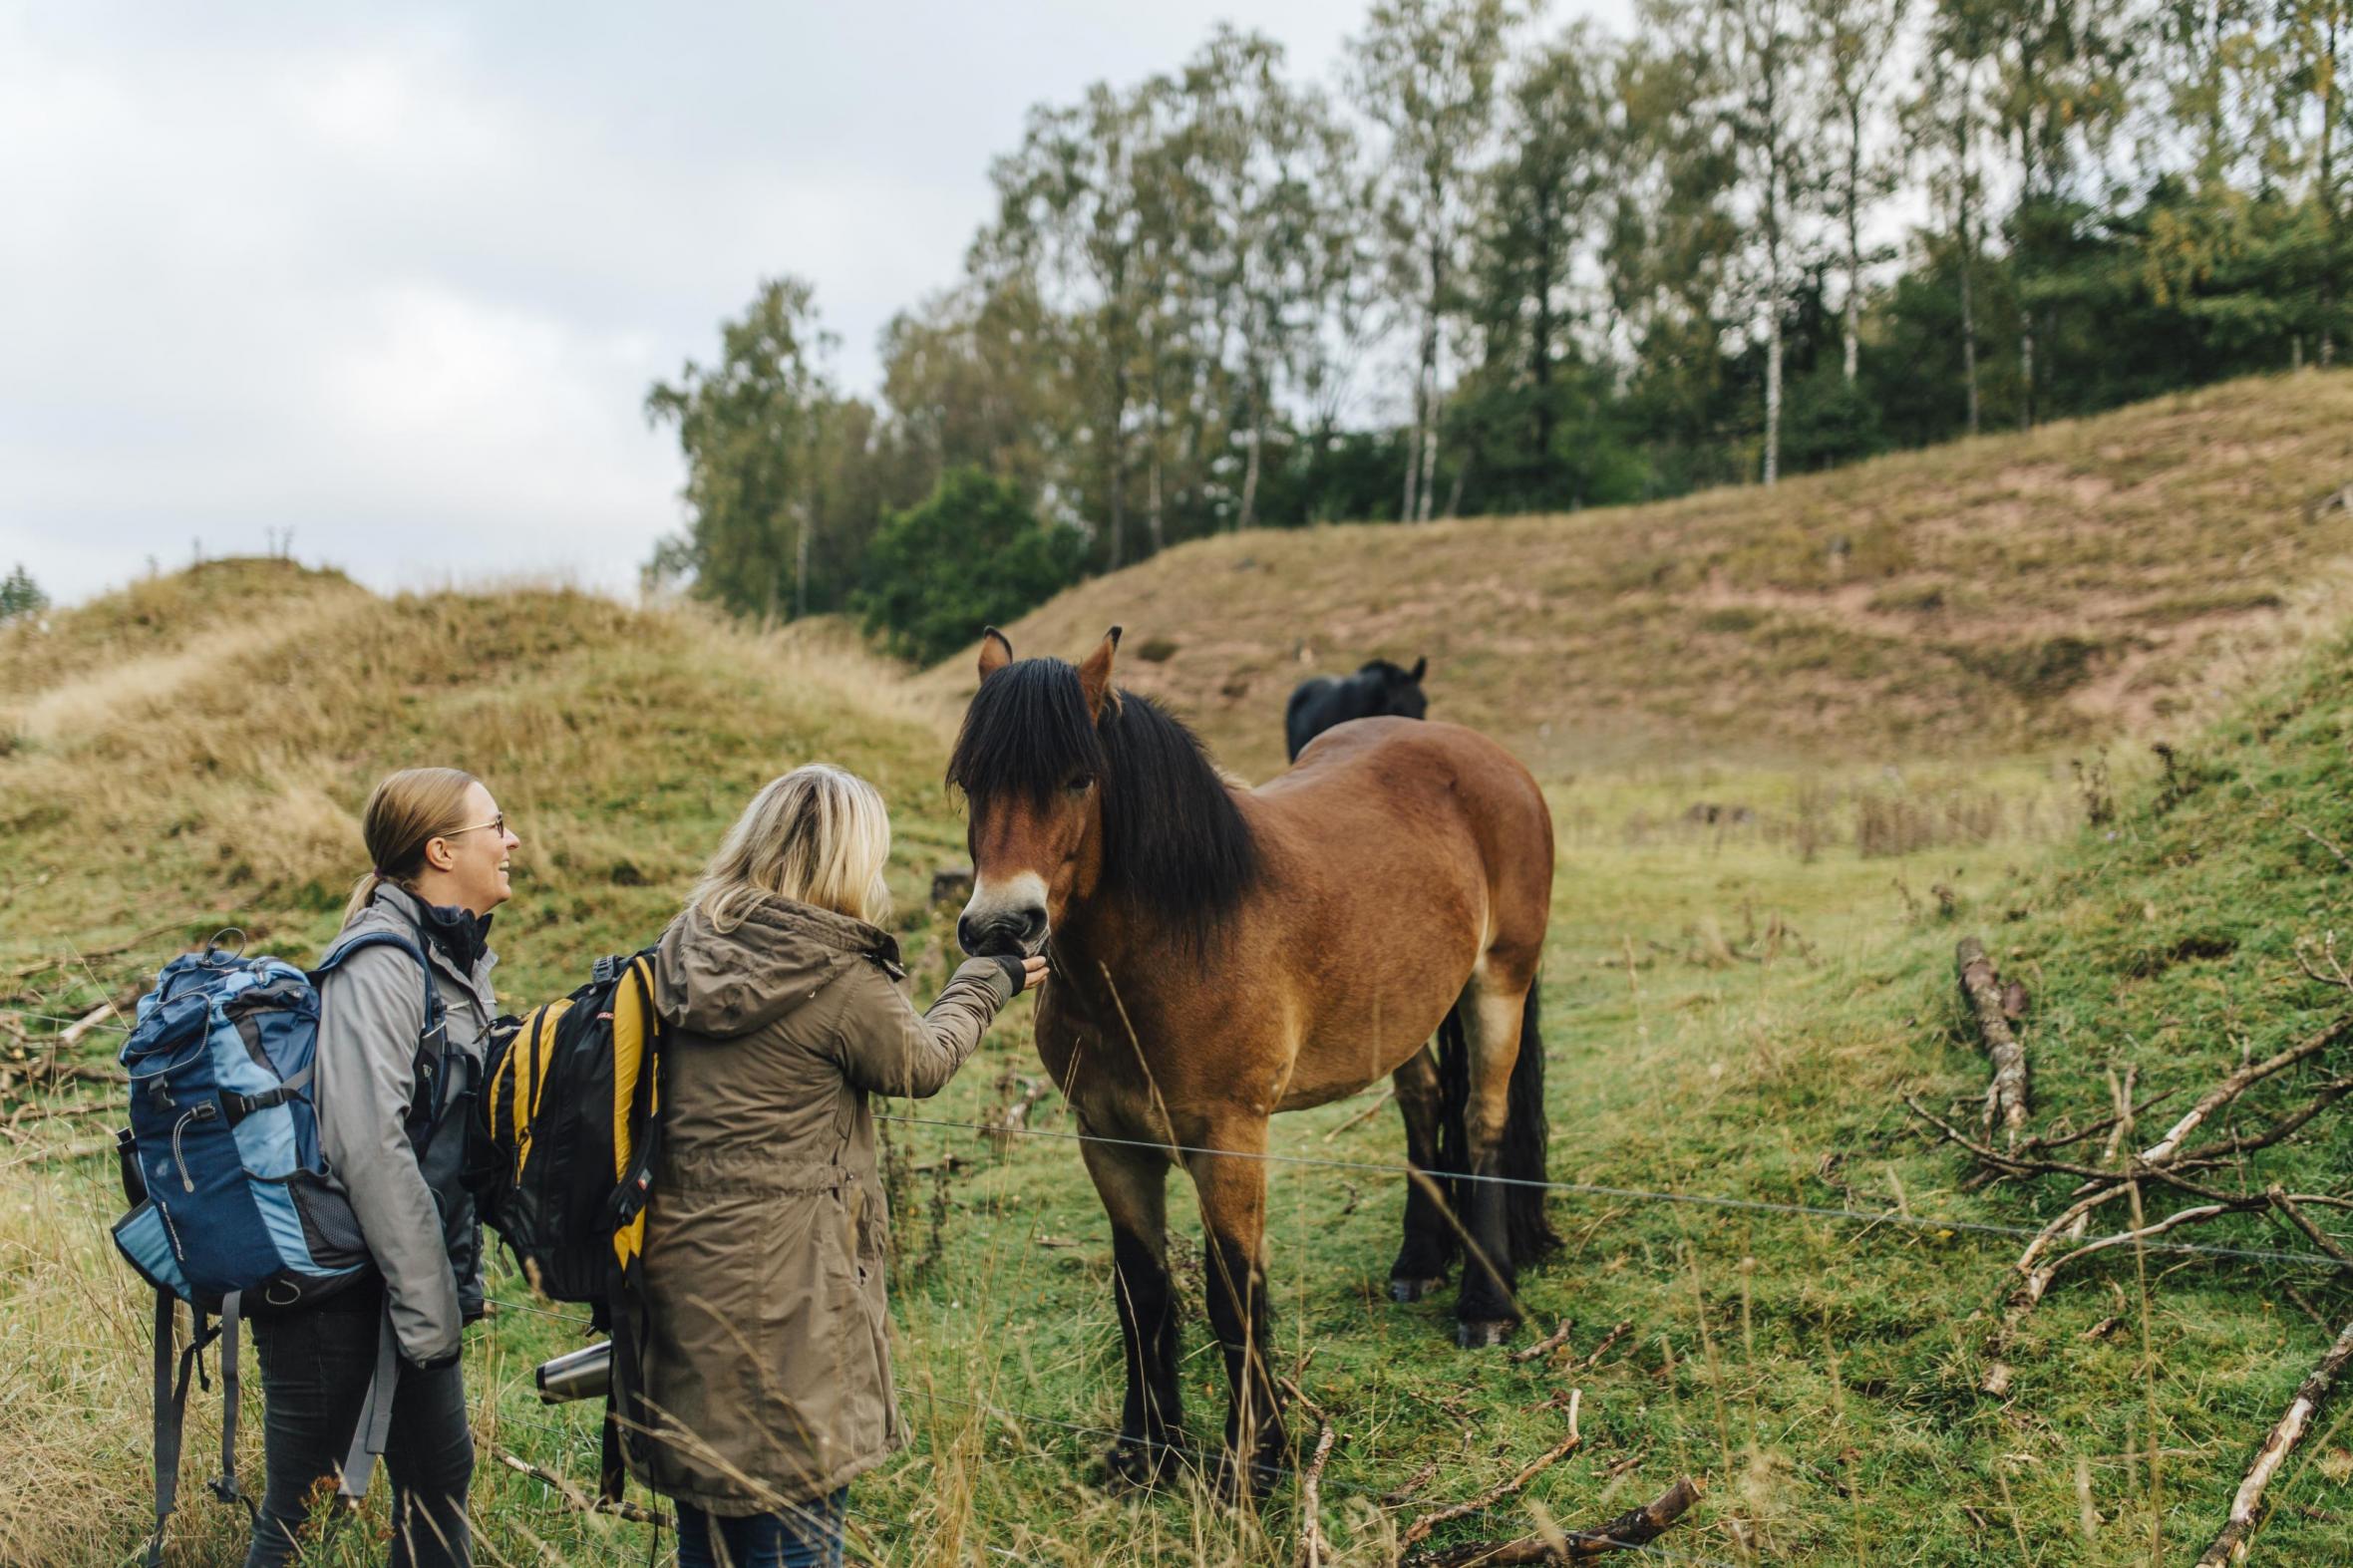 Two women feeding a horse in the countryside